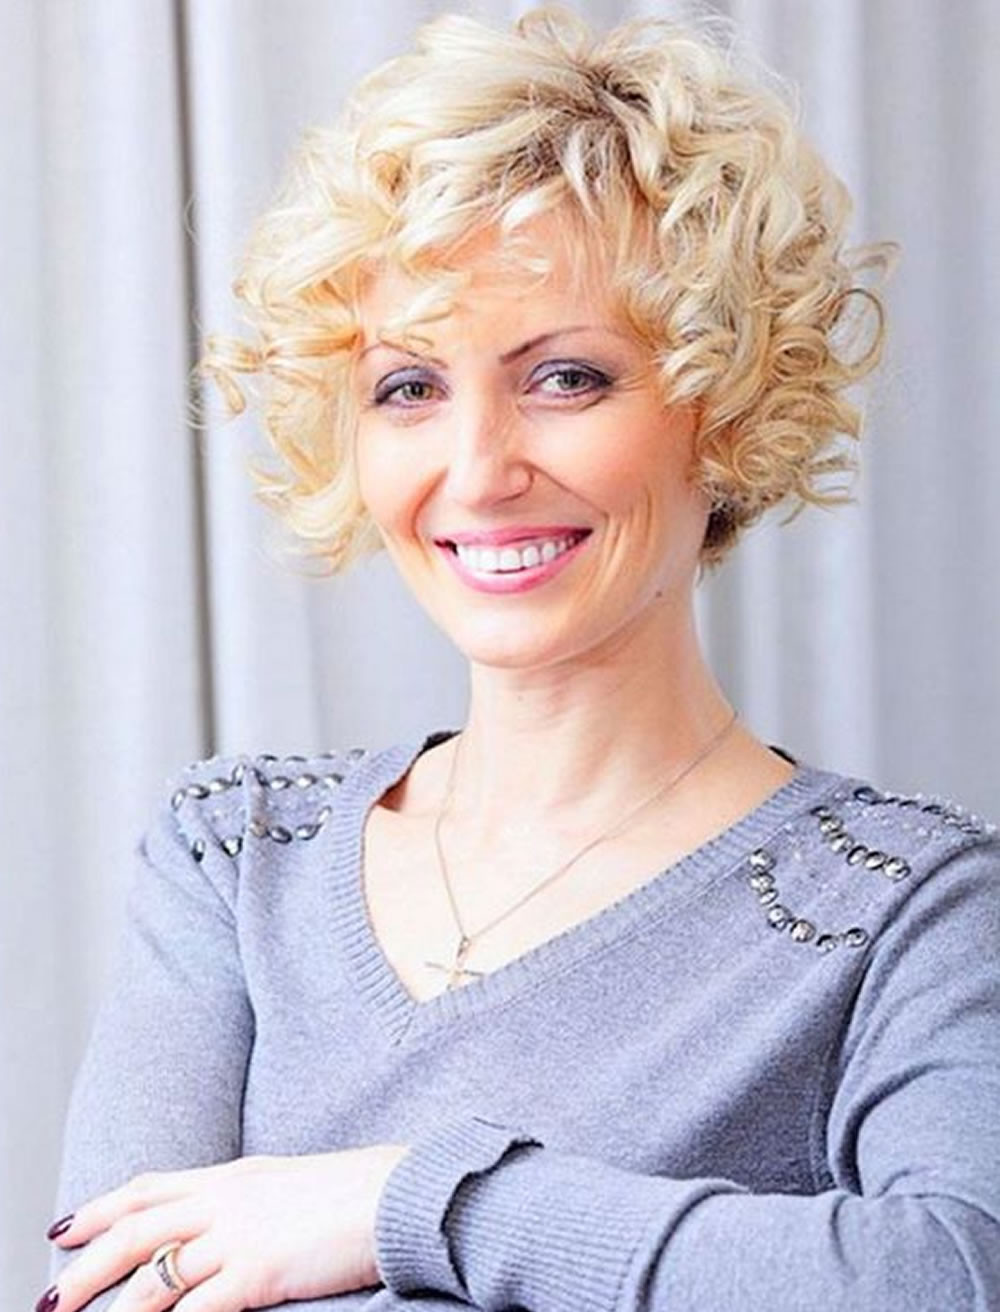 Short Curly Hairstyles For Older Women
 Curly Short Hairstyles for Older Women Over 50 – Best